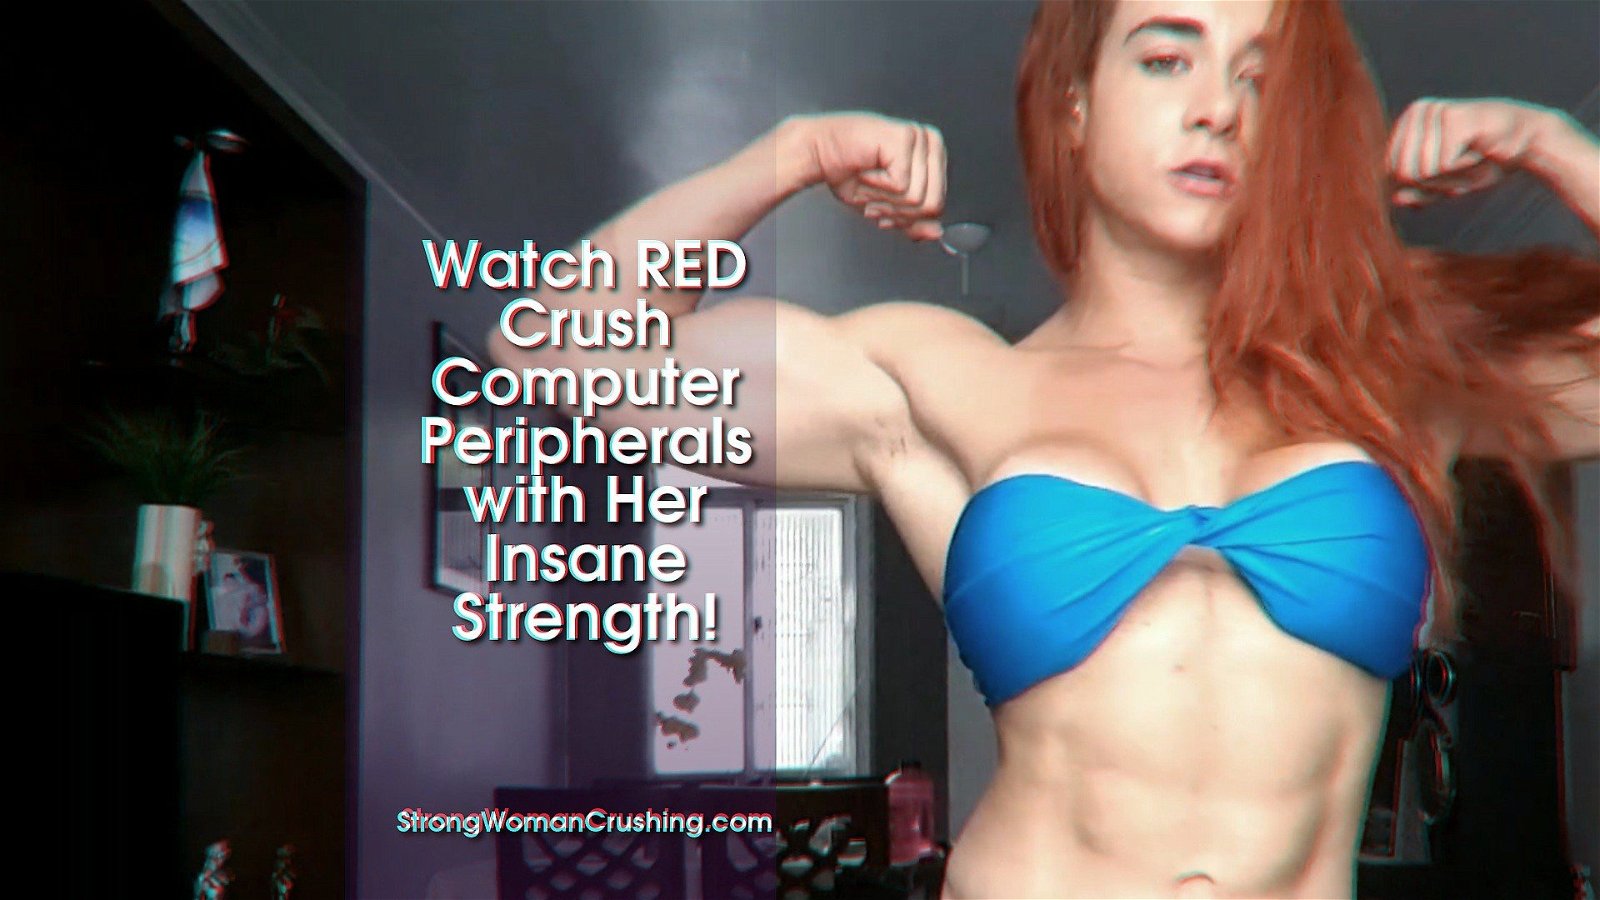 Watch the Photo by MusclegirlStrength with the username @MusclegirlStrength, who is a brand user, posted on March 5, 2024 and the text says 'Watch RED Crush Computer Peripherals with Her Insane Strength!
Full Video: Fbbstrength.com

Experience the power and sensuality of muscular girls crushing and bending with strength on our site - unleash your inner strength now!

#musclegirl..'